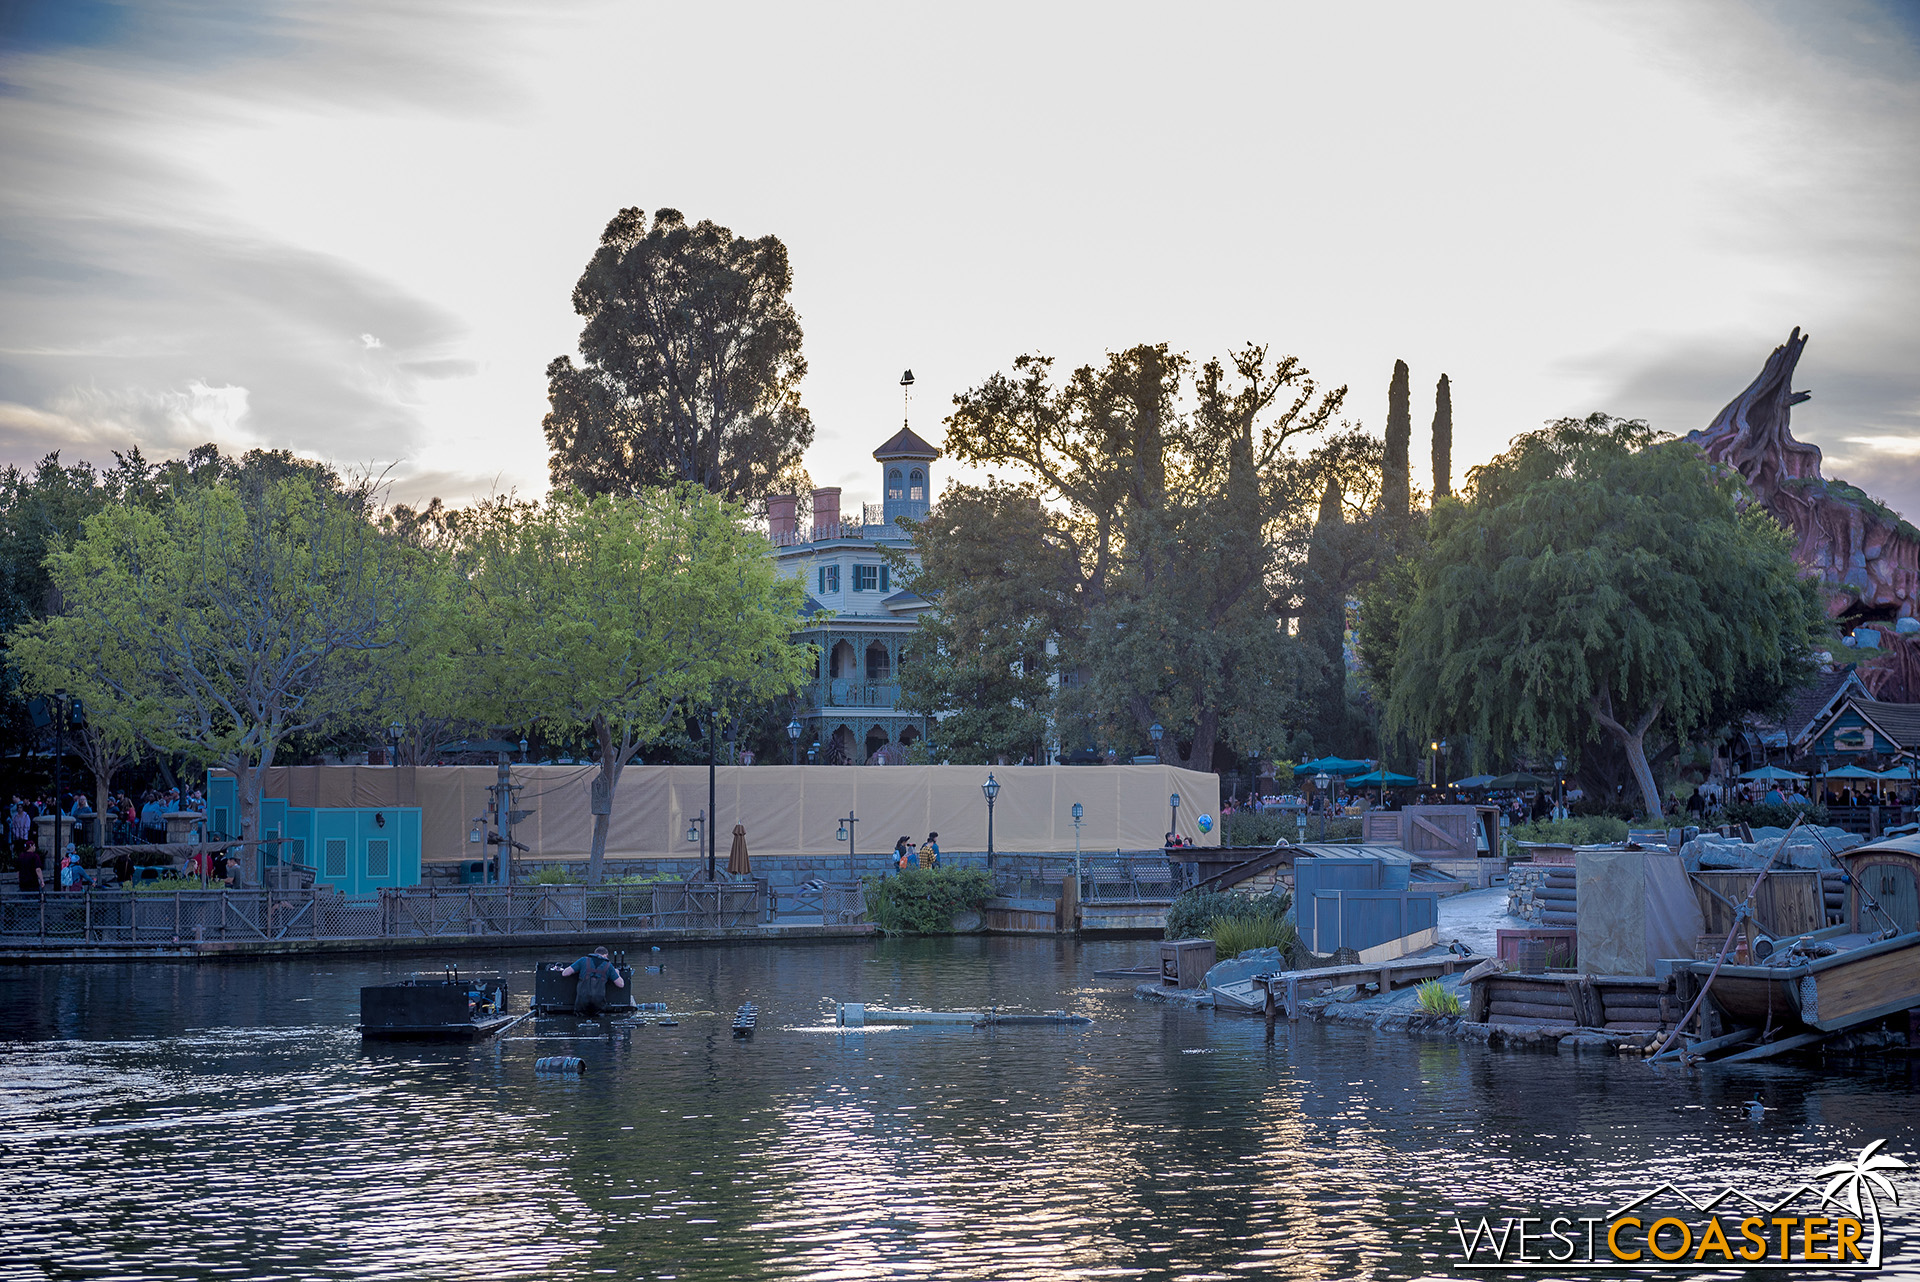  And a bit of work is going on at this planter in New Orleans Square.  So lots of little beautification projects going on throughout the park to get things spruced up in line with the opening of Star Wars: Galaxy’s Edge! 